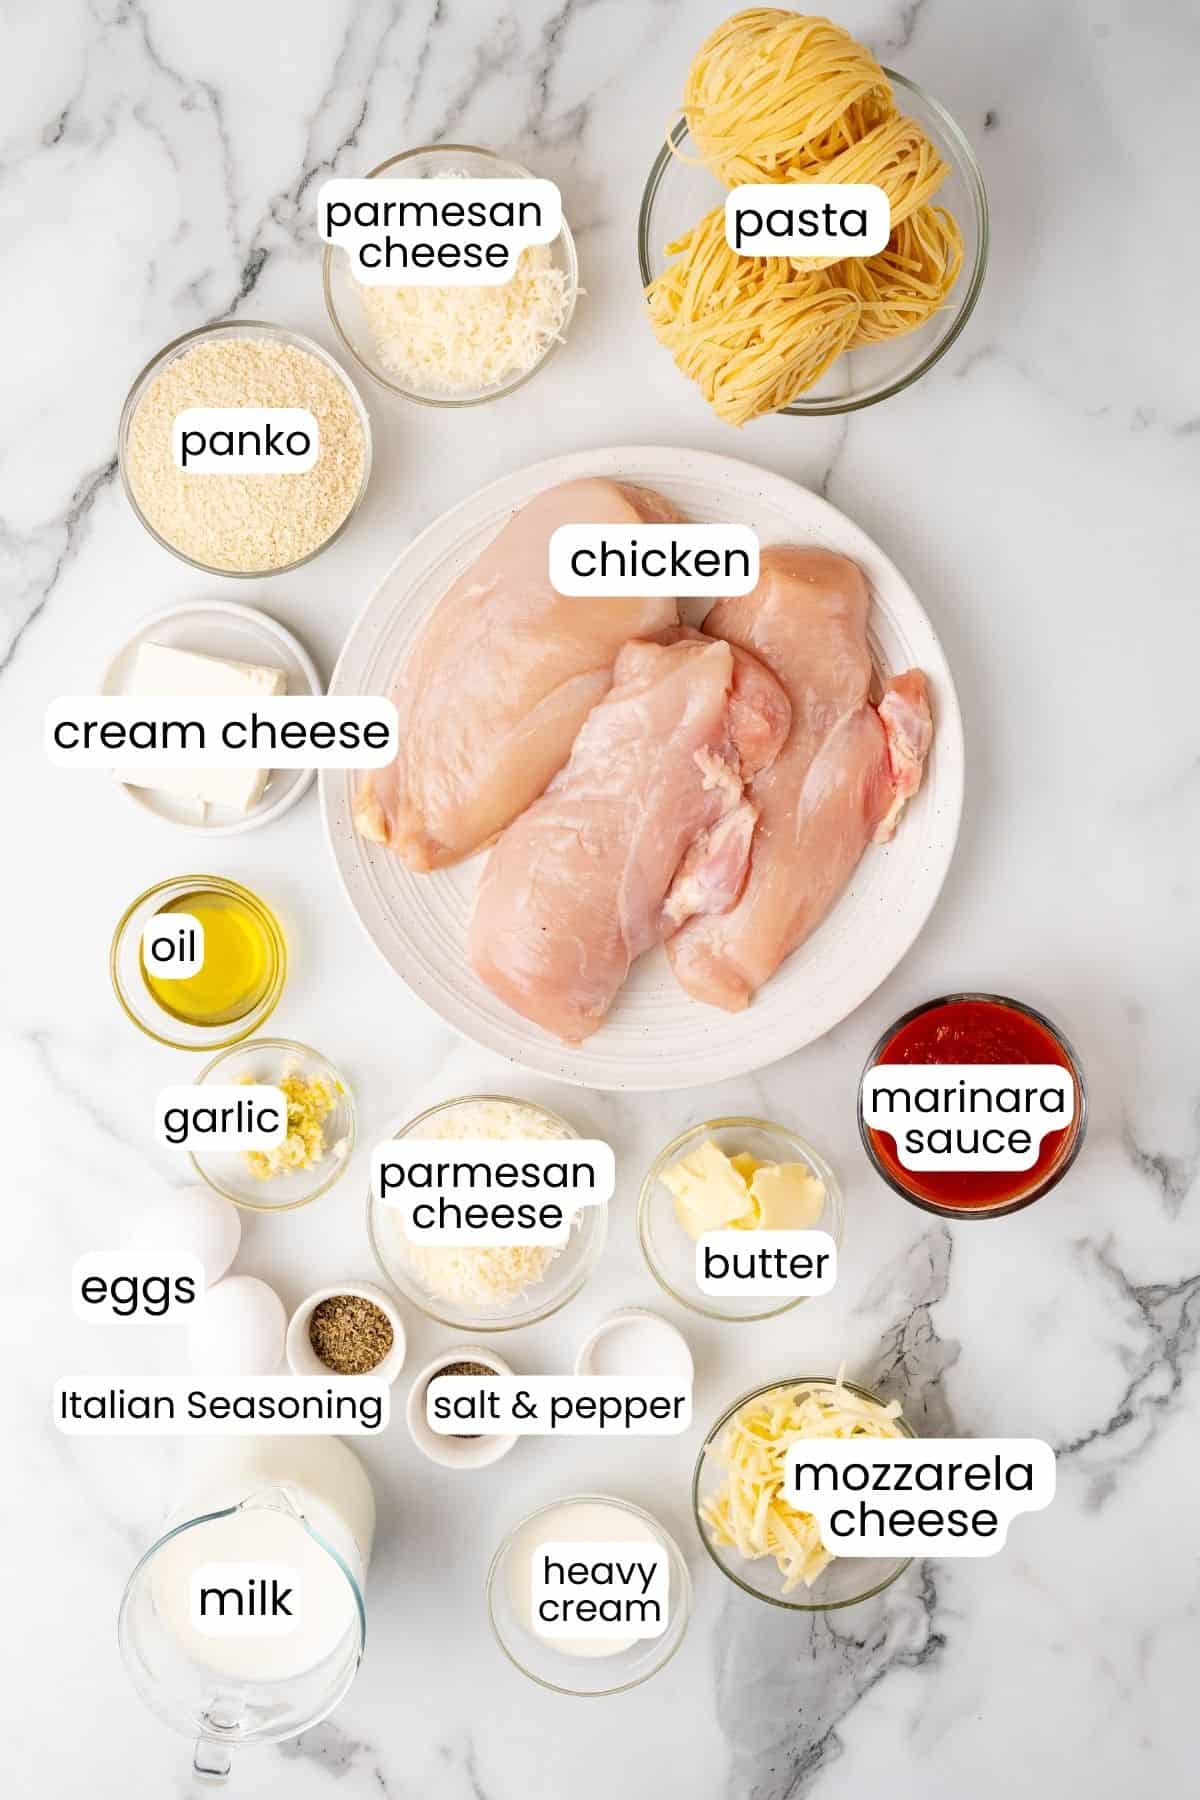 Ingredients for Chicken Parmesan Alfredo recipe arranged neatly on a marble surface.